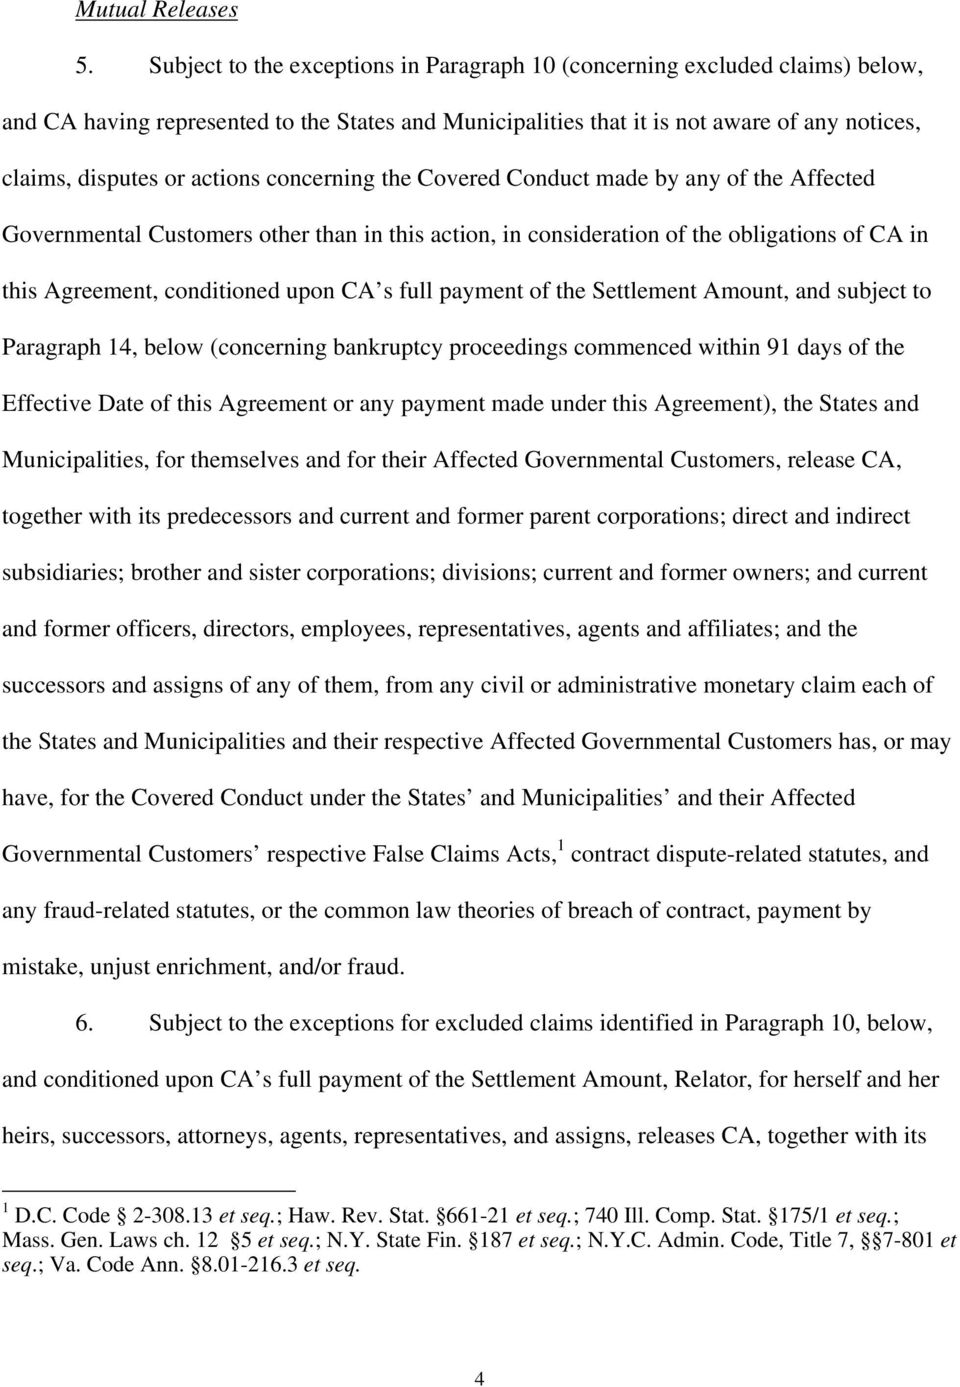 actions concerning the Covered Conduct made by any of the Affected Governmental Customers other than in this action, in consideration of the obligations of CA in this Agreement, conditioned upon CA s